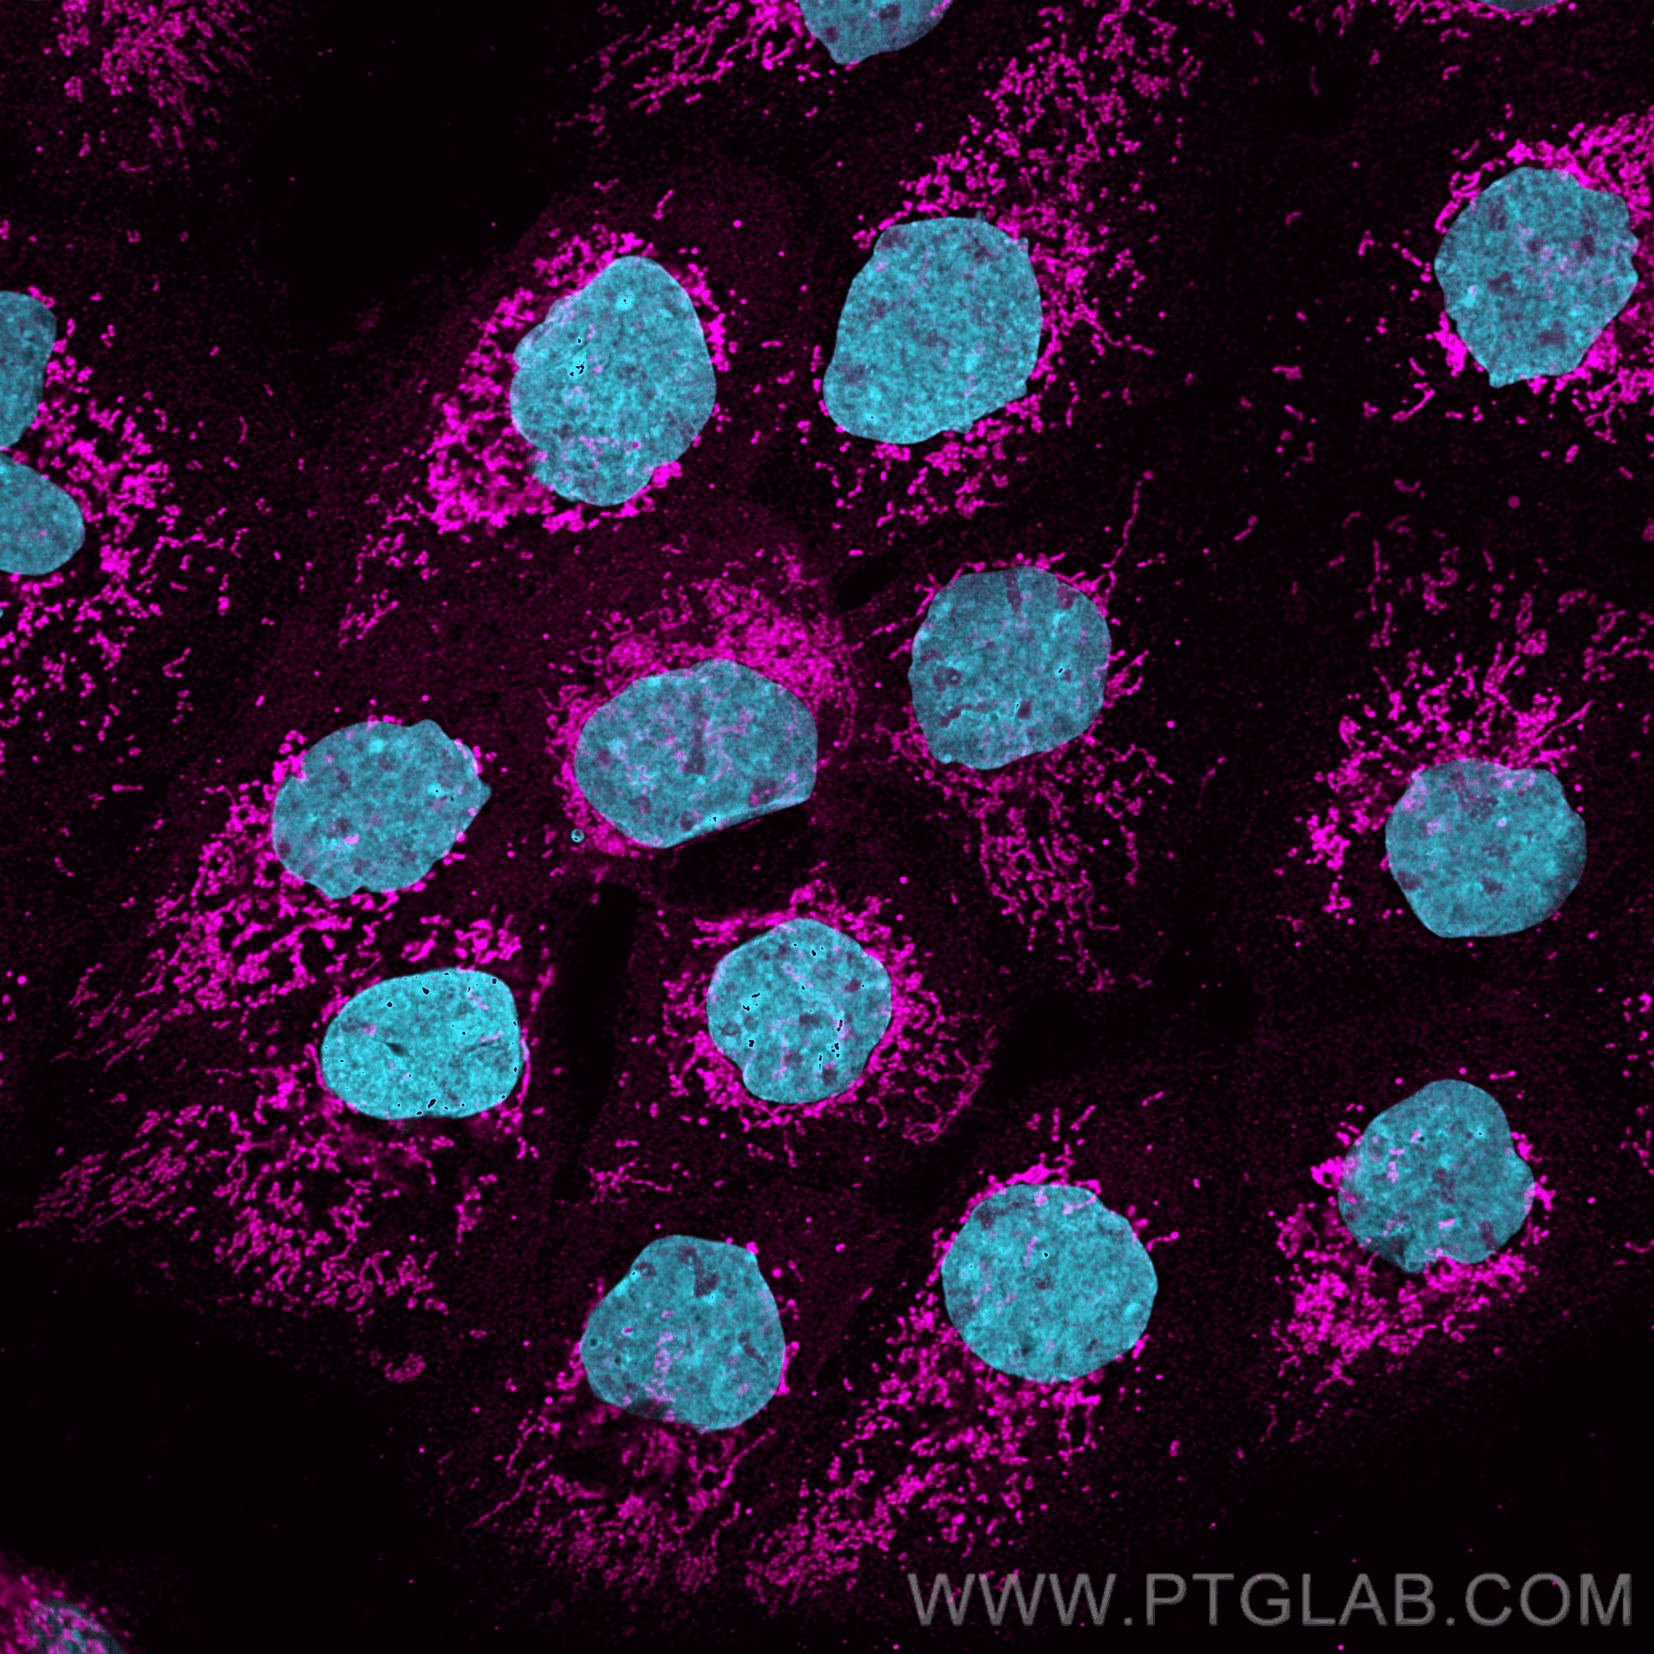 Immunofluorescence analysis of A431 cells stained with rabbit anti-COXIV antibody (11242-1-AP, magenta) and Nano-Secondary® alpaca anti-rabbit IgG, recombinant VHH, CoraLite® Plus 647 (srb2GCL647-1), 1:500. Nuclei were stained with DAPI (blue).